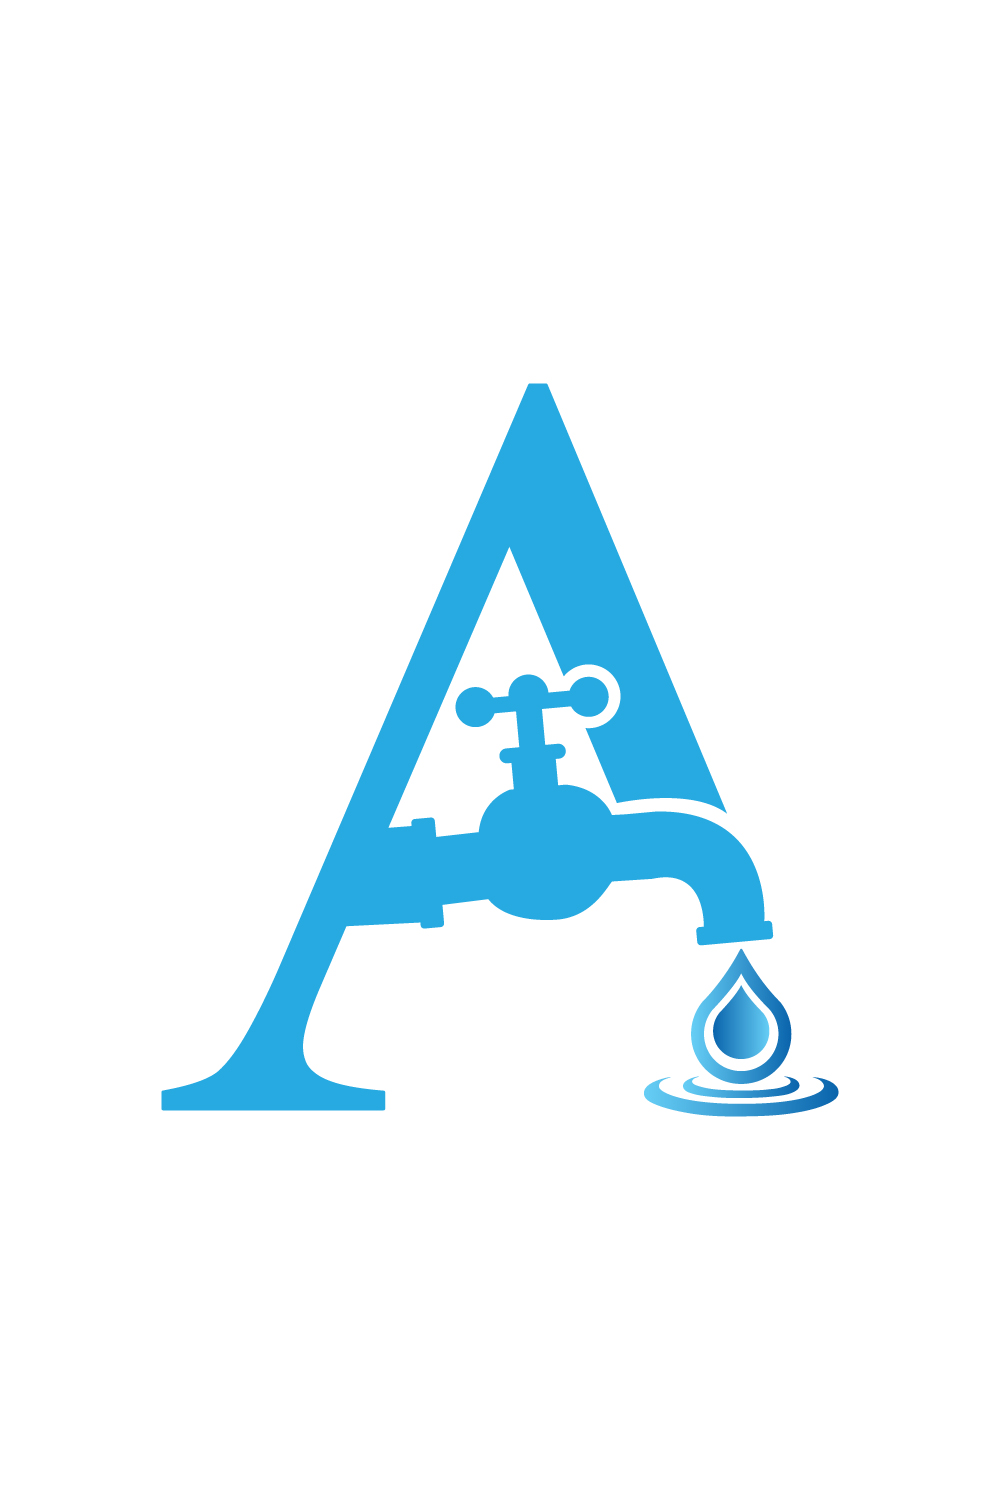 Professional A letters logo design vector images A Water drop logo design A water tap logo best icon template illustration pinterest preview image.